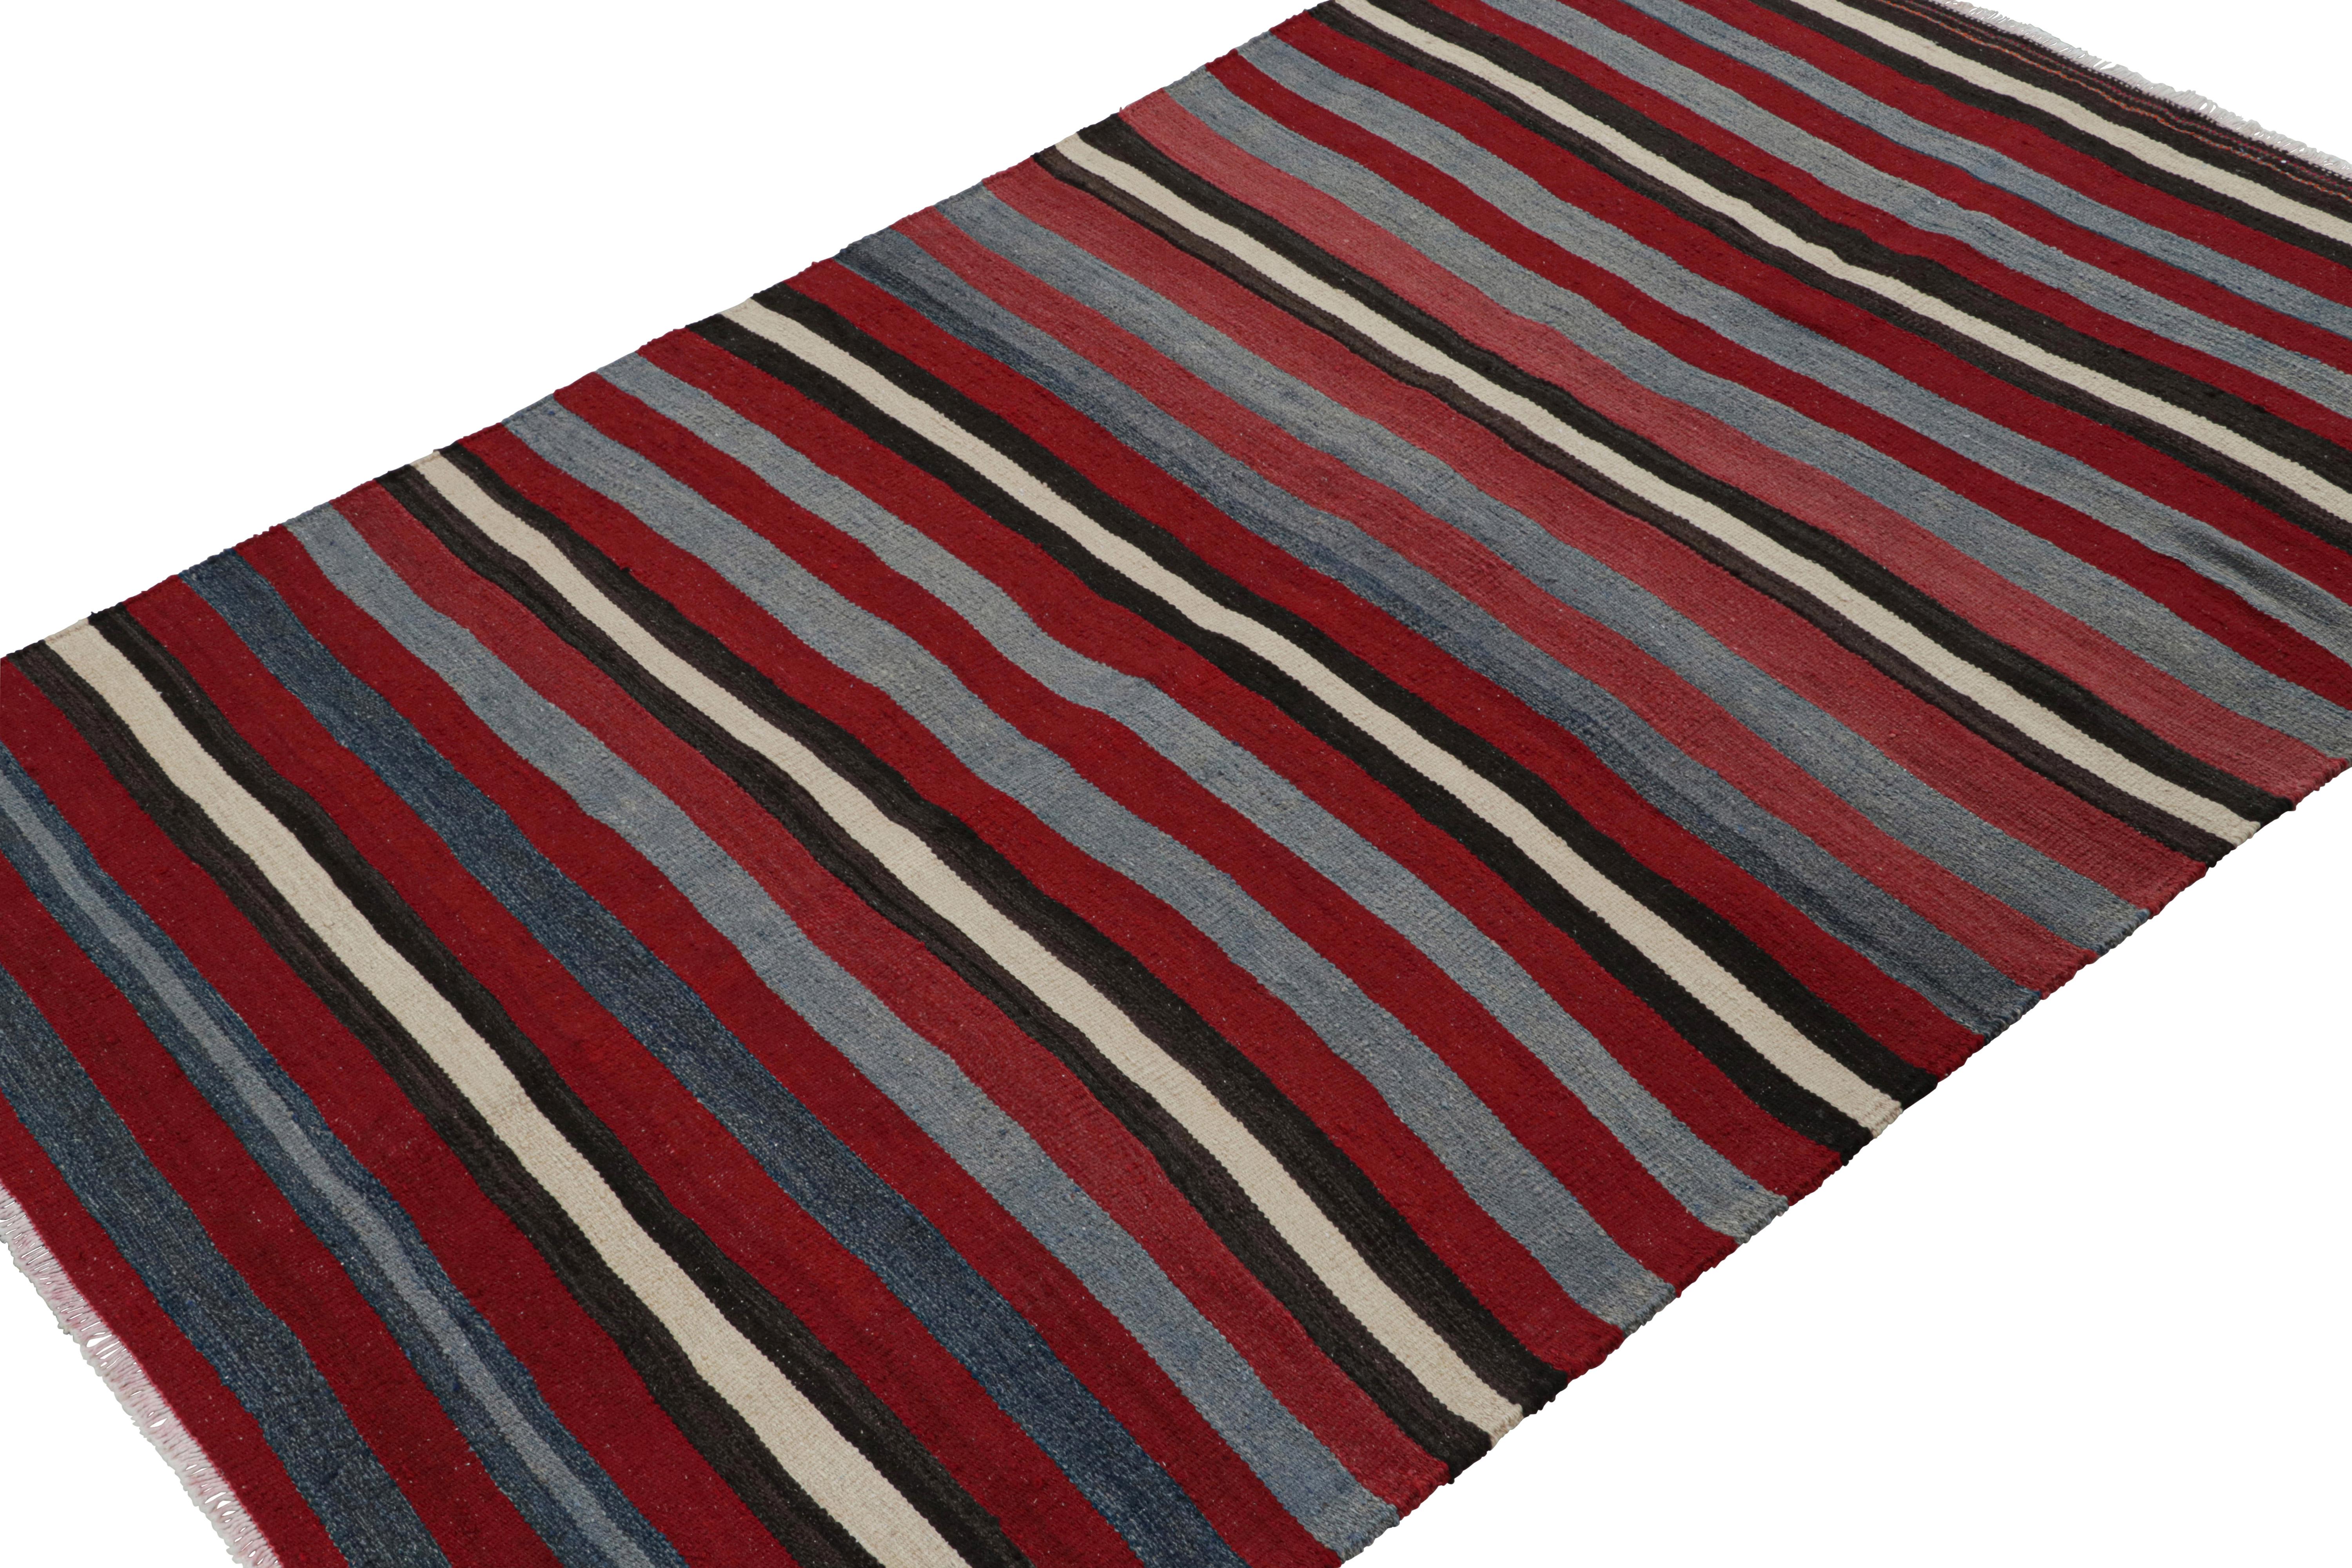 Handwoven in wool, circa 1950-1960, this 4x6 vintage  Shahsavan Persian tribal Kilim rug in red, with silver/gray and blue stripes, is an exciting addition to the Rug & Kilim collection. 

On the Design: 

The Vintage Shahsavan Persian tribal Kilim